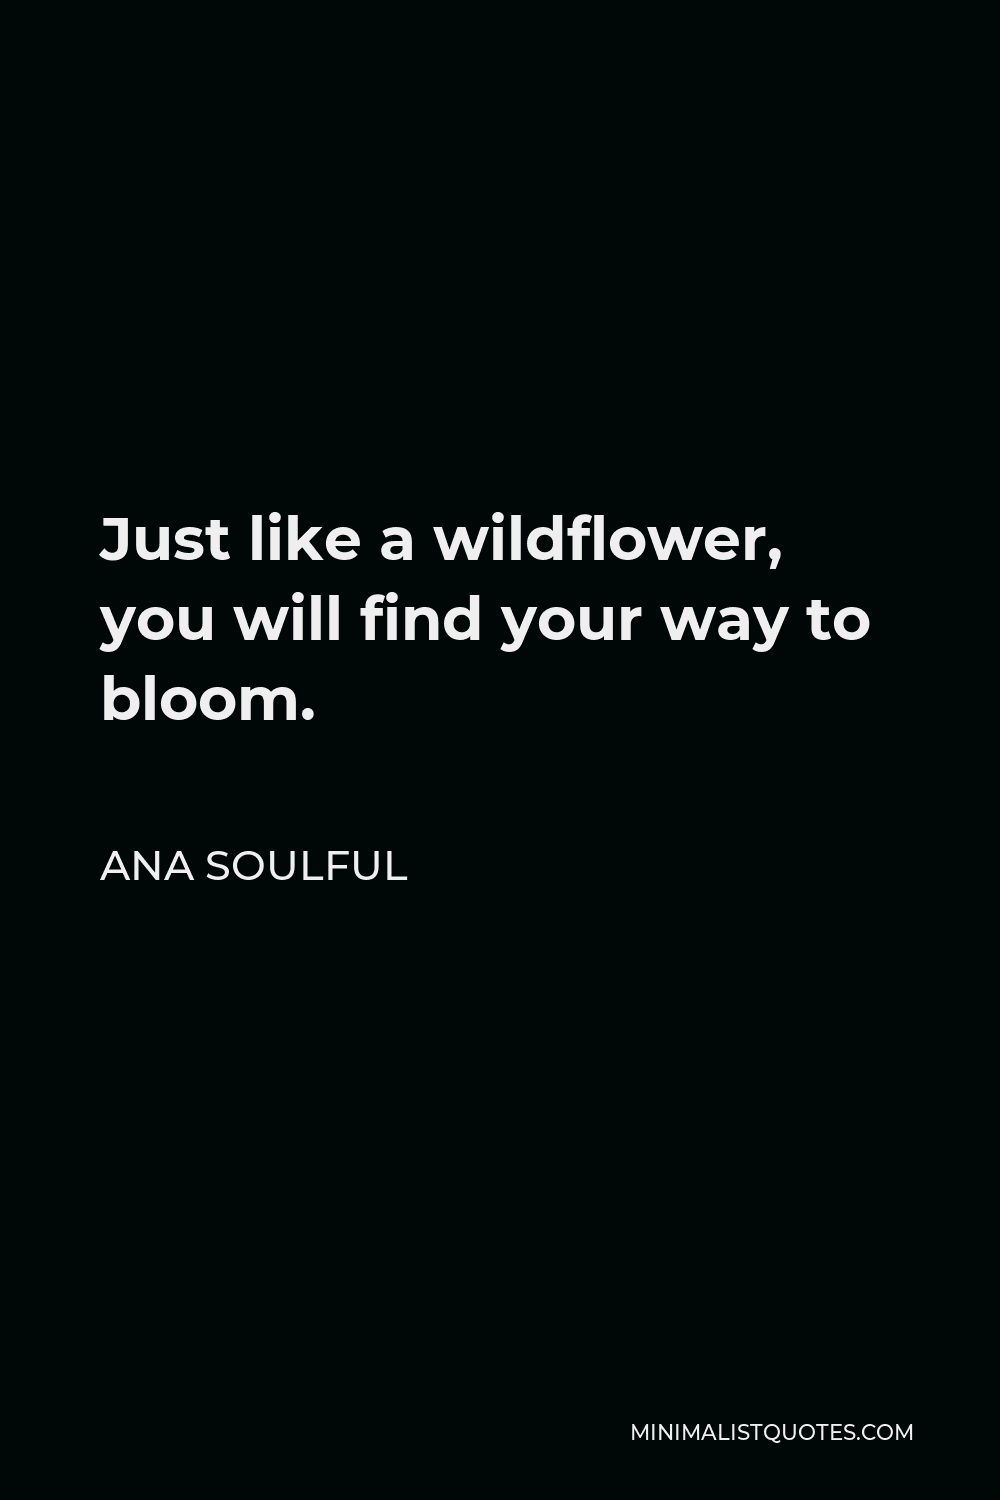 Ana Soulful Quote - Just like a wildflower, you will find your way to bloom.